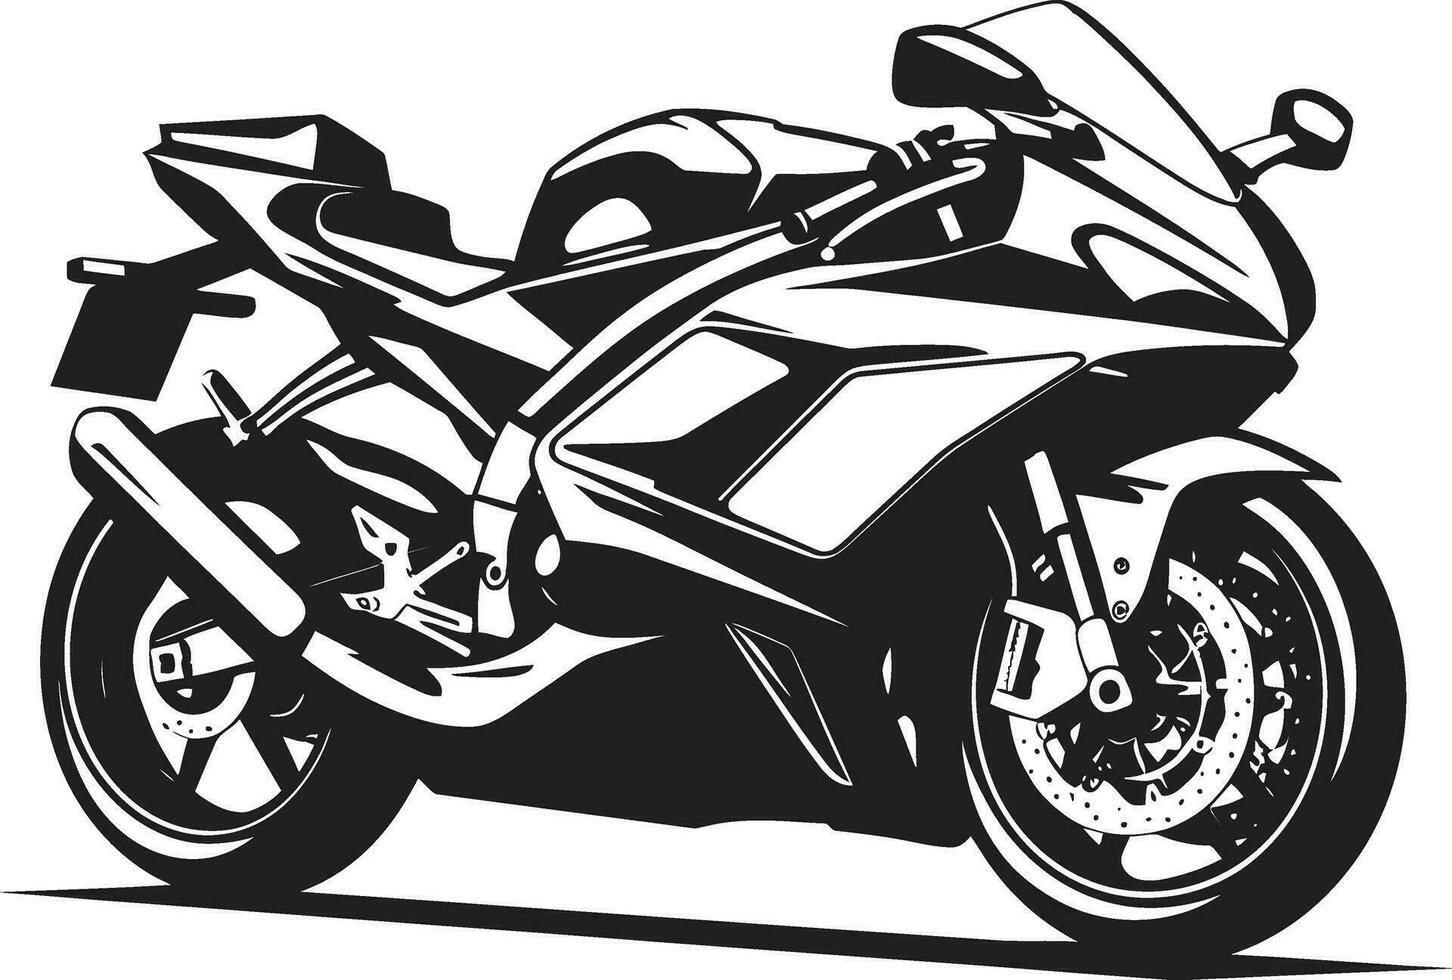 Sport Bike Silhouettes in Vector Form Vectorized Excitement Sports Bike Art Gallery